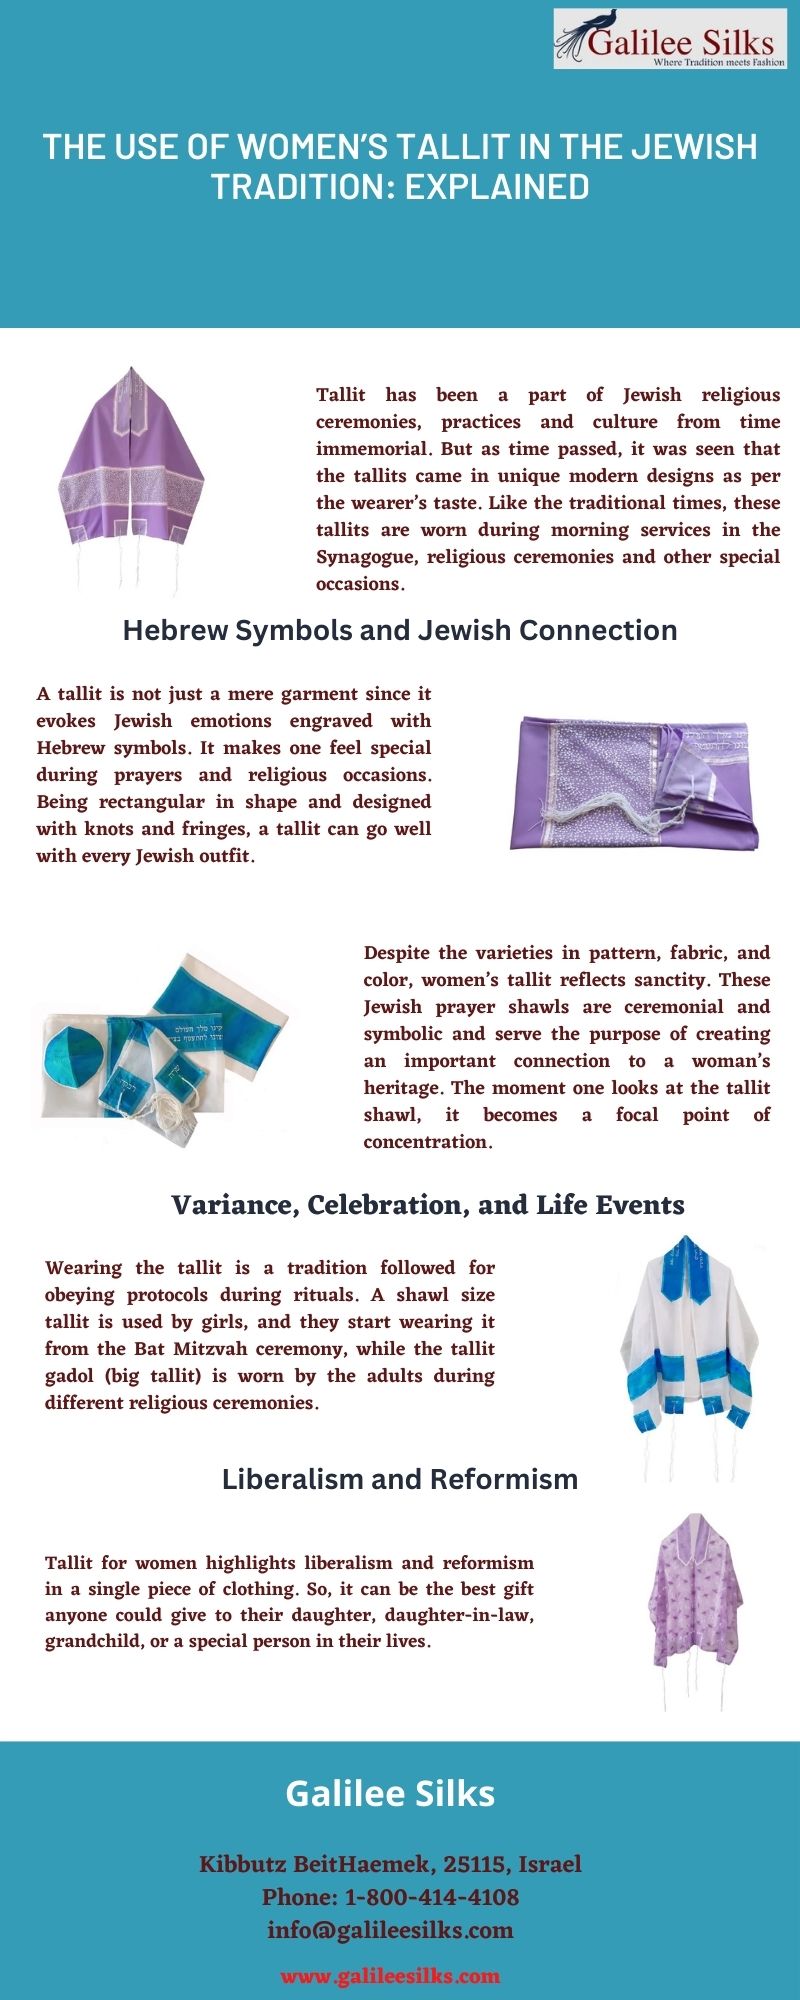 The use of Women’s Tallit in the Jewish tradition Explained Get high-quality and elegant women’s tallit made with delicate designs and beautiful colors from the magnificent collection of Galilee Silks. For more details, visit: https://www.galileesilks.com/collections/womens-tallit-1
 by amramrafi